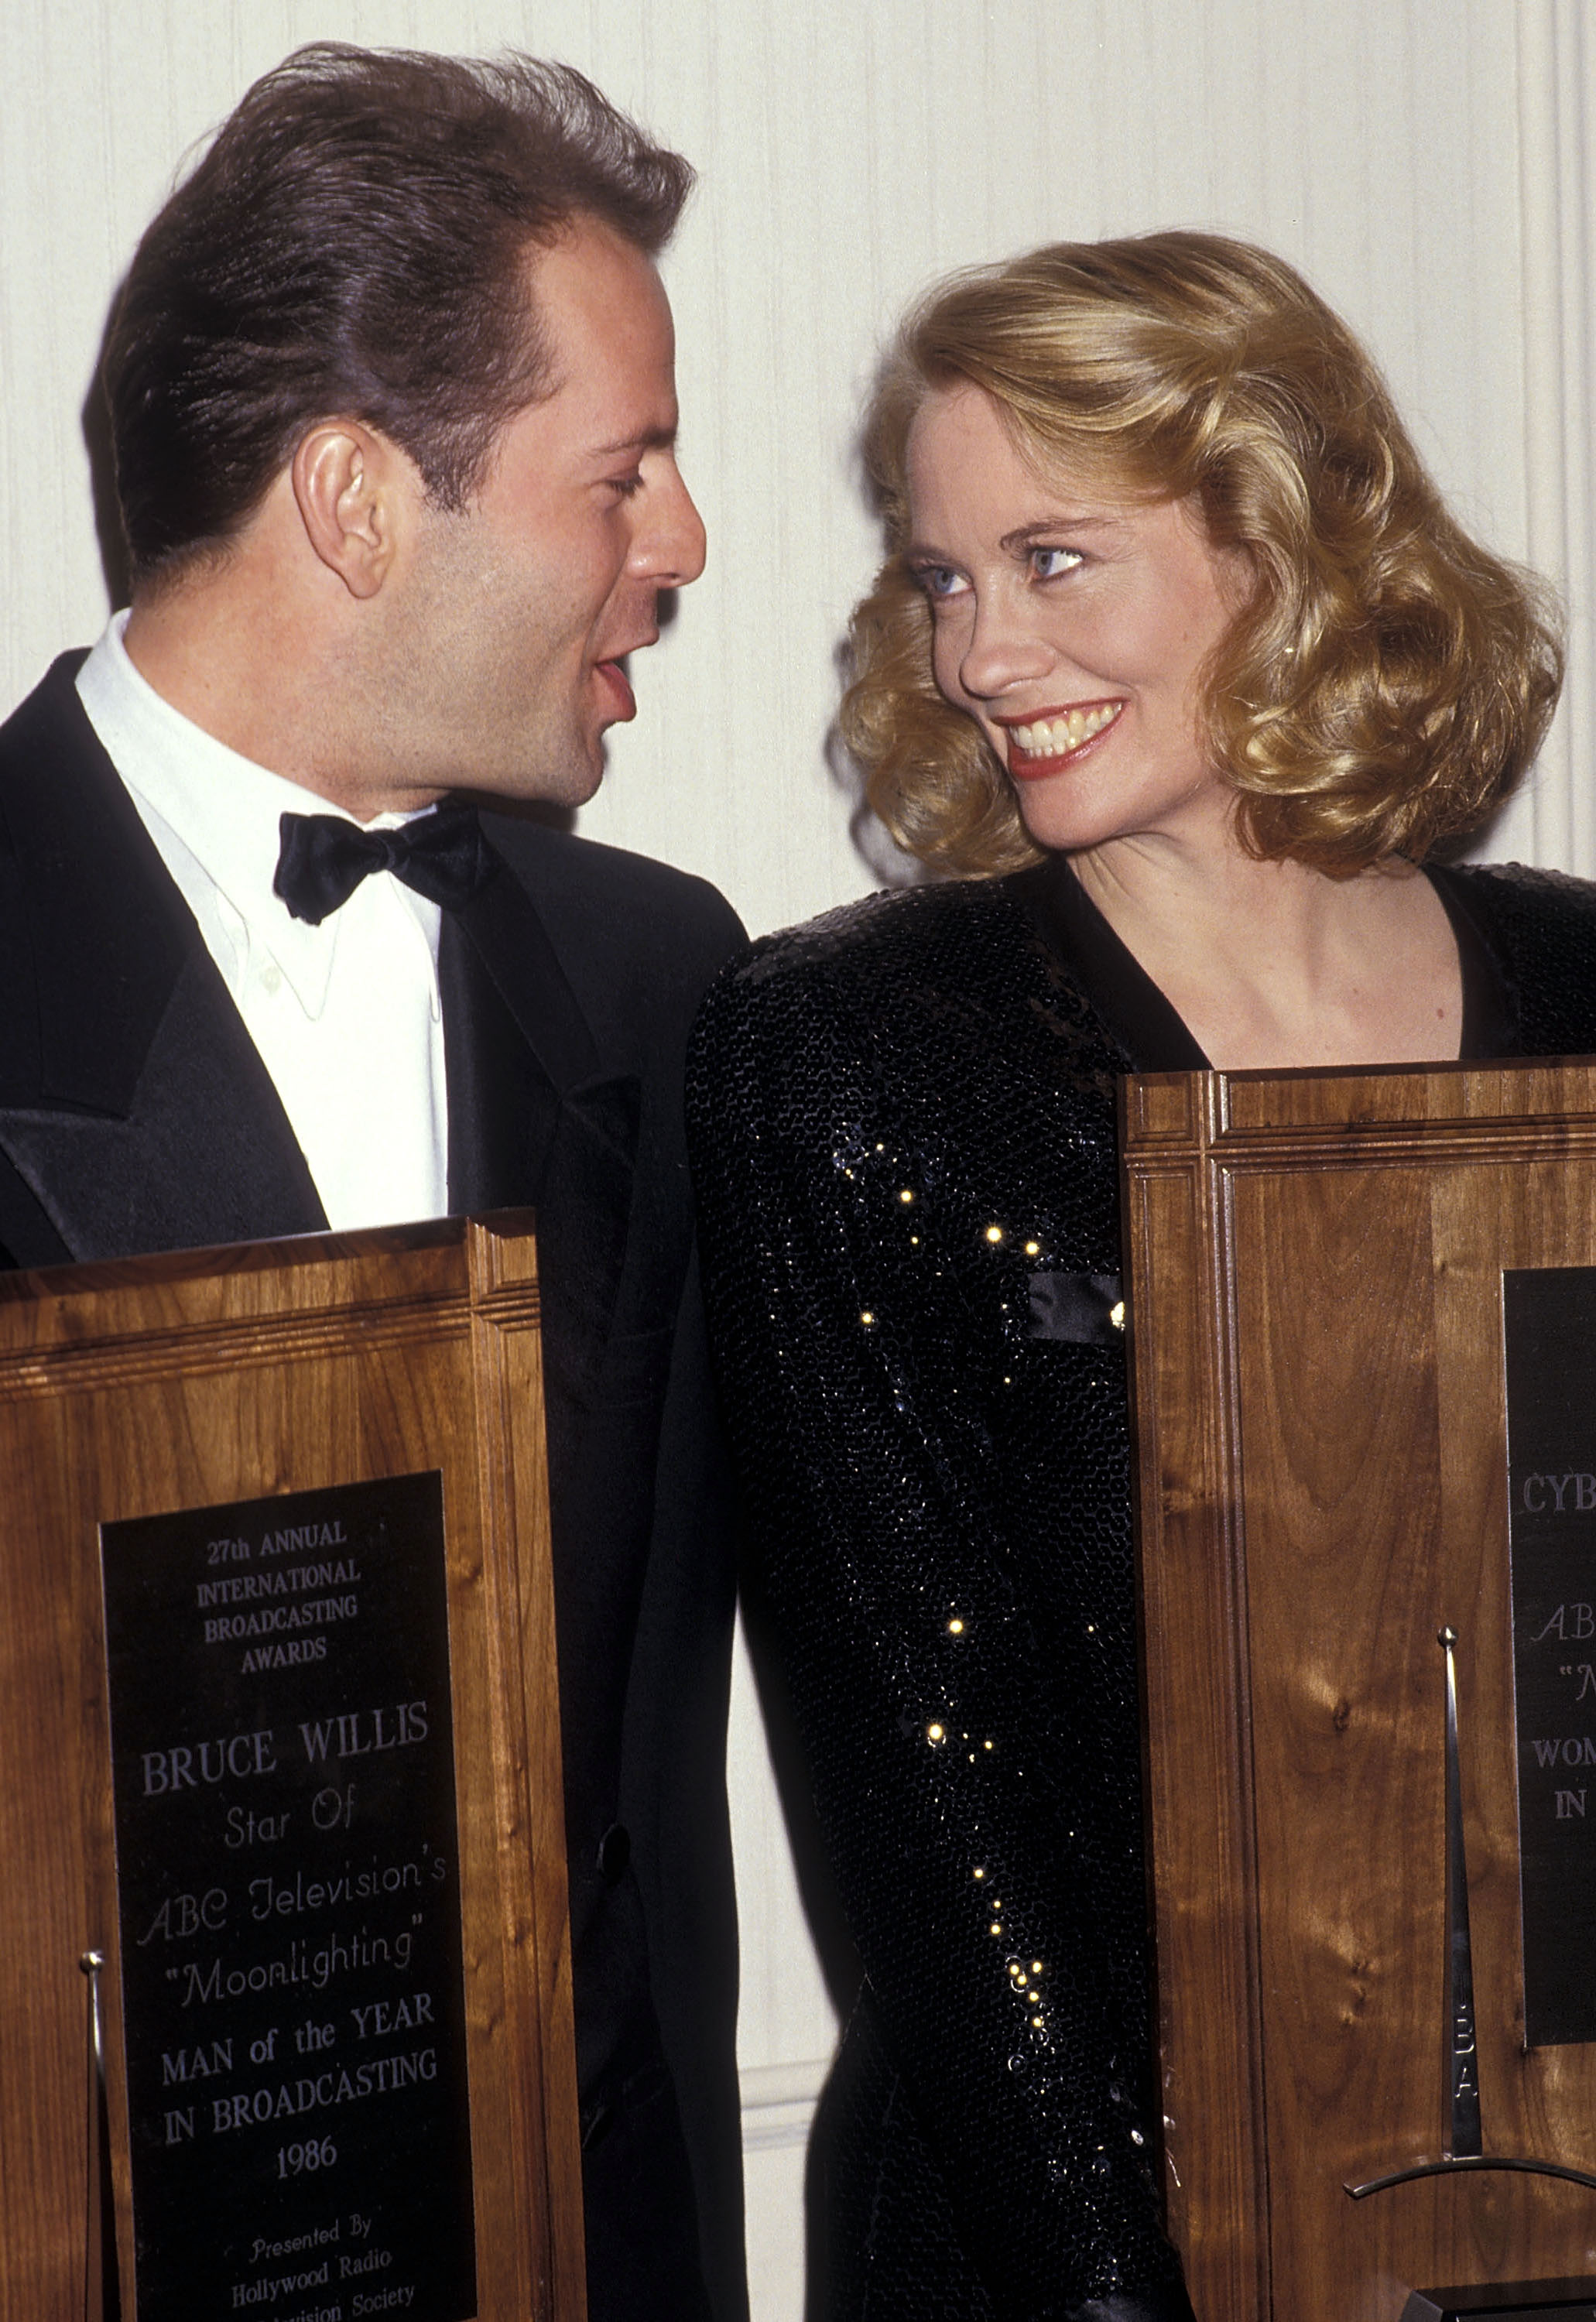 Bruce Willis and Cybill Shepherd attend the Hollywood Radio & Television Society's 27th Annual International Broadcasting Awards on March 17, 1987, at Century Plaza Hotel in Los Angeles, California. | Source: Getty Images